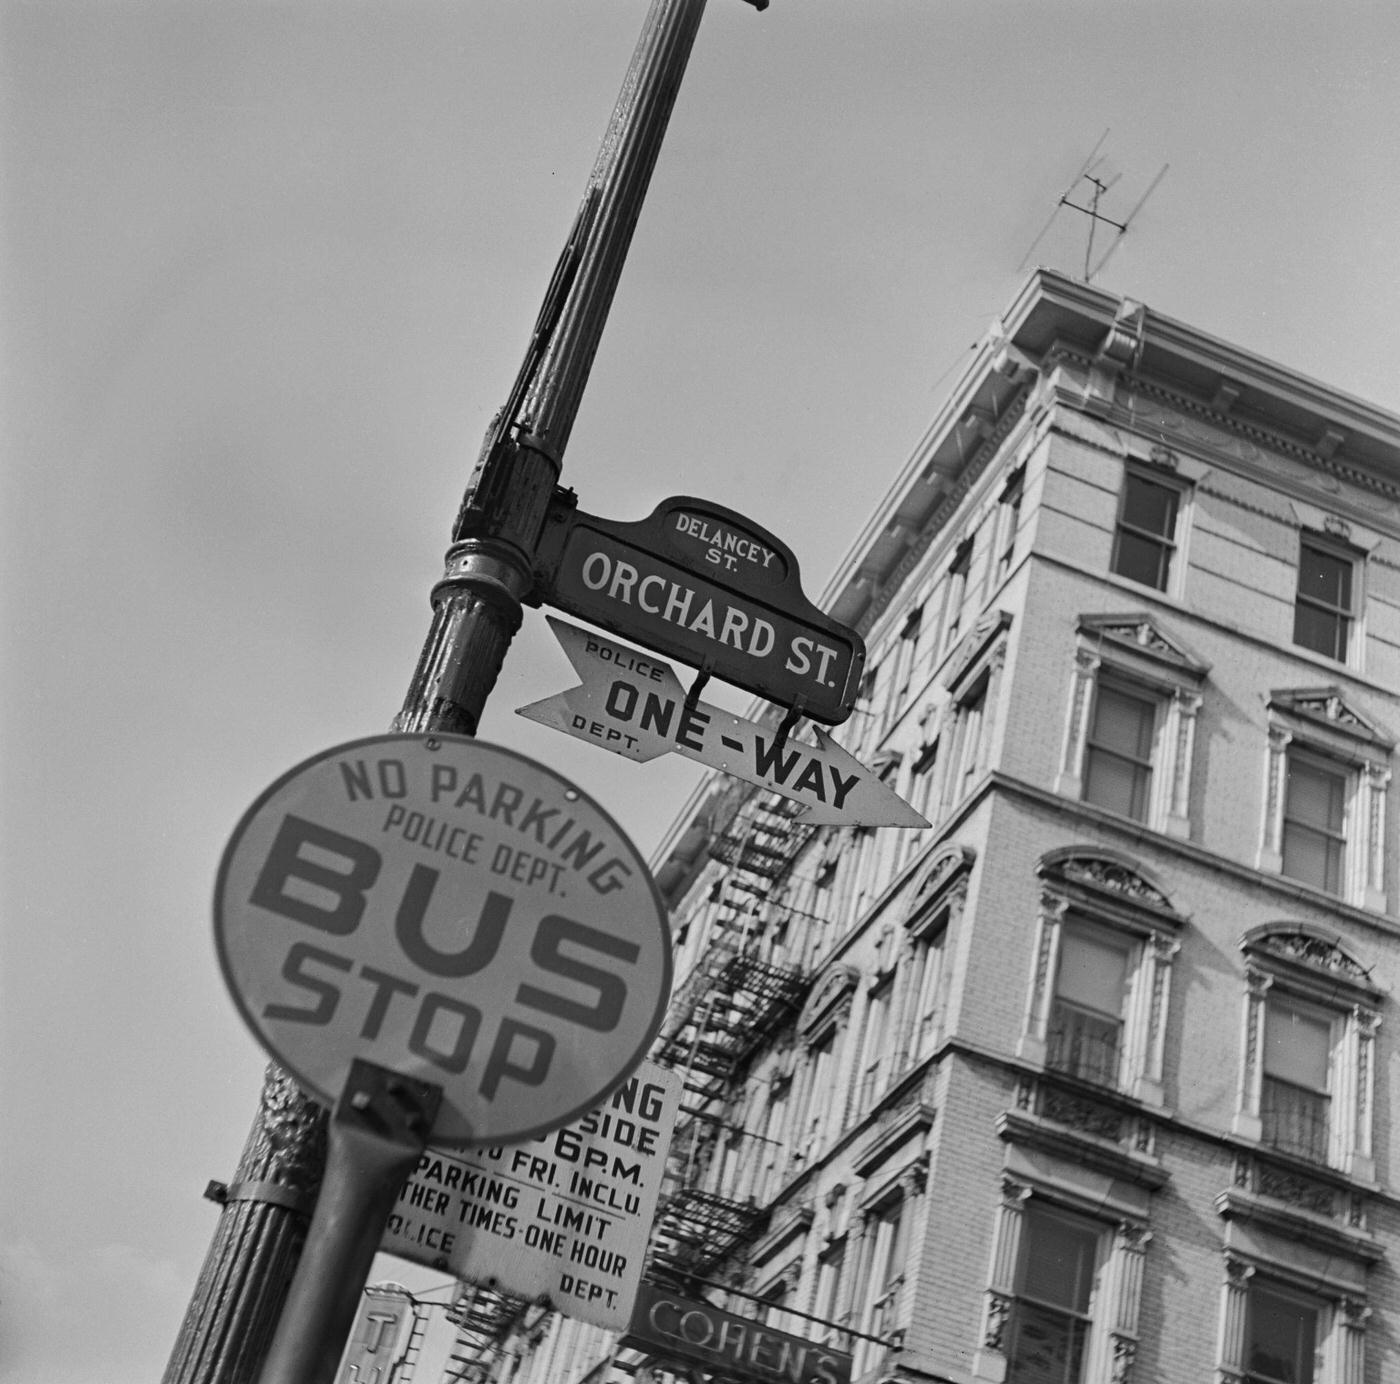 A Street Sign In New York: Bus Stop And Street Sign At Orchard And Delancey Street In Lower East Side, Manhattan, Circa 1950.